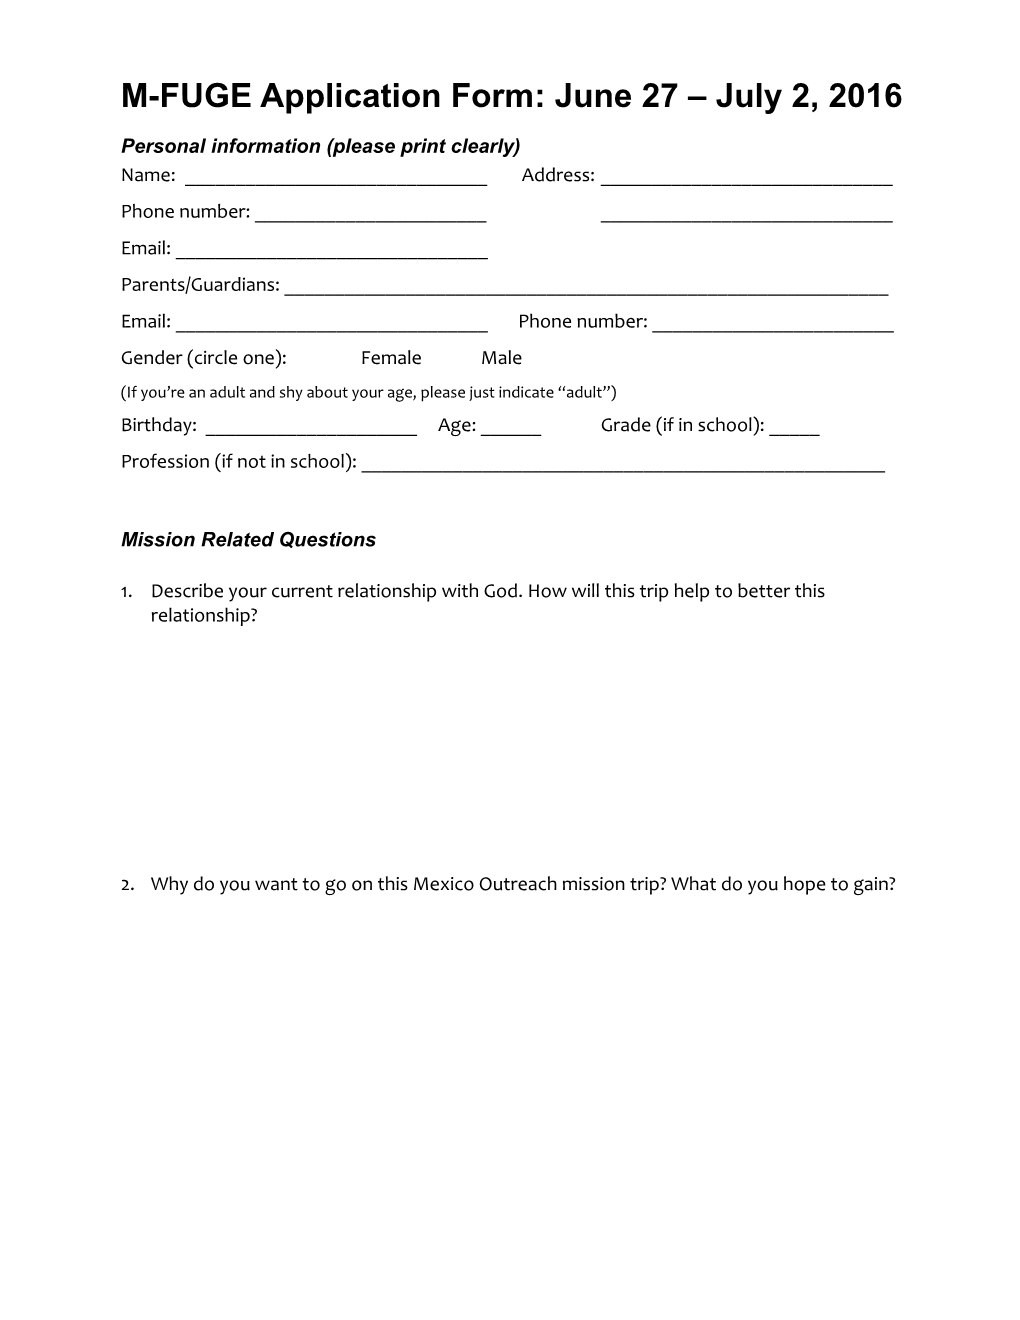 Application for Mexico Outreach Missions Team, Summer 06